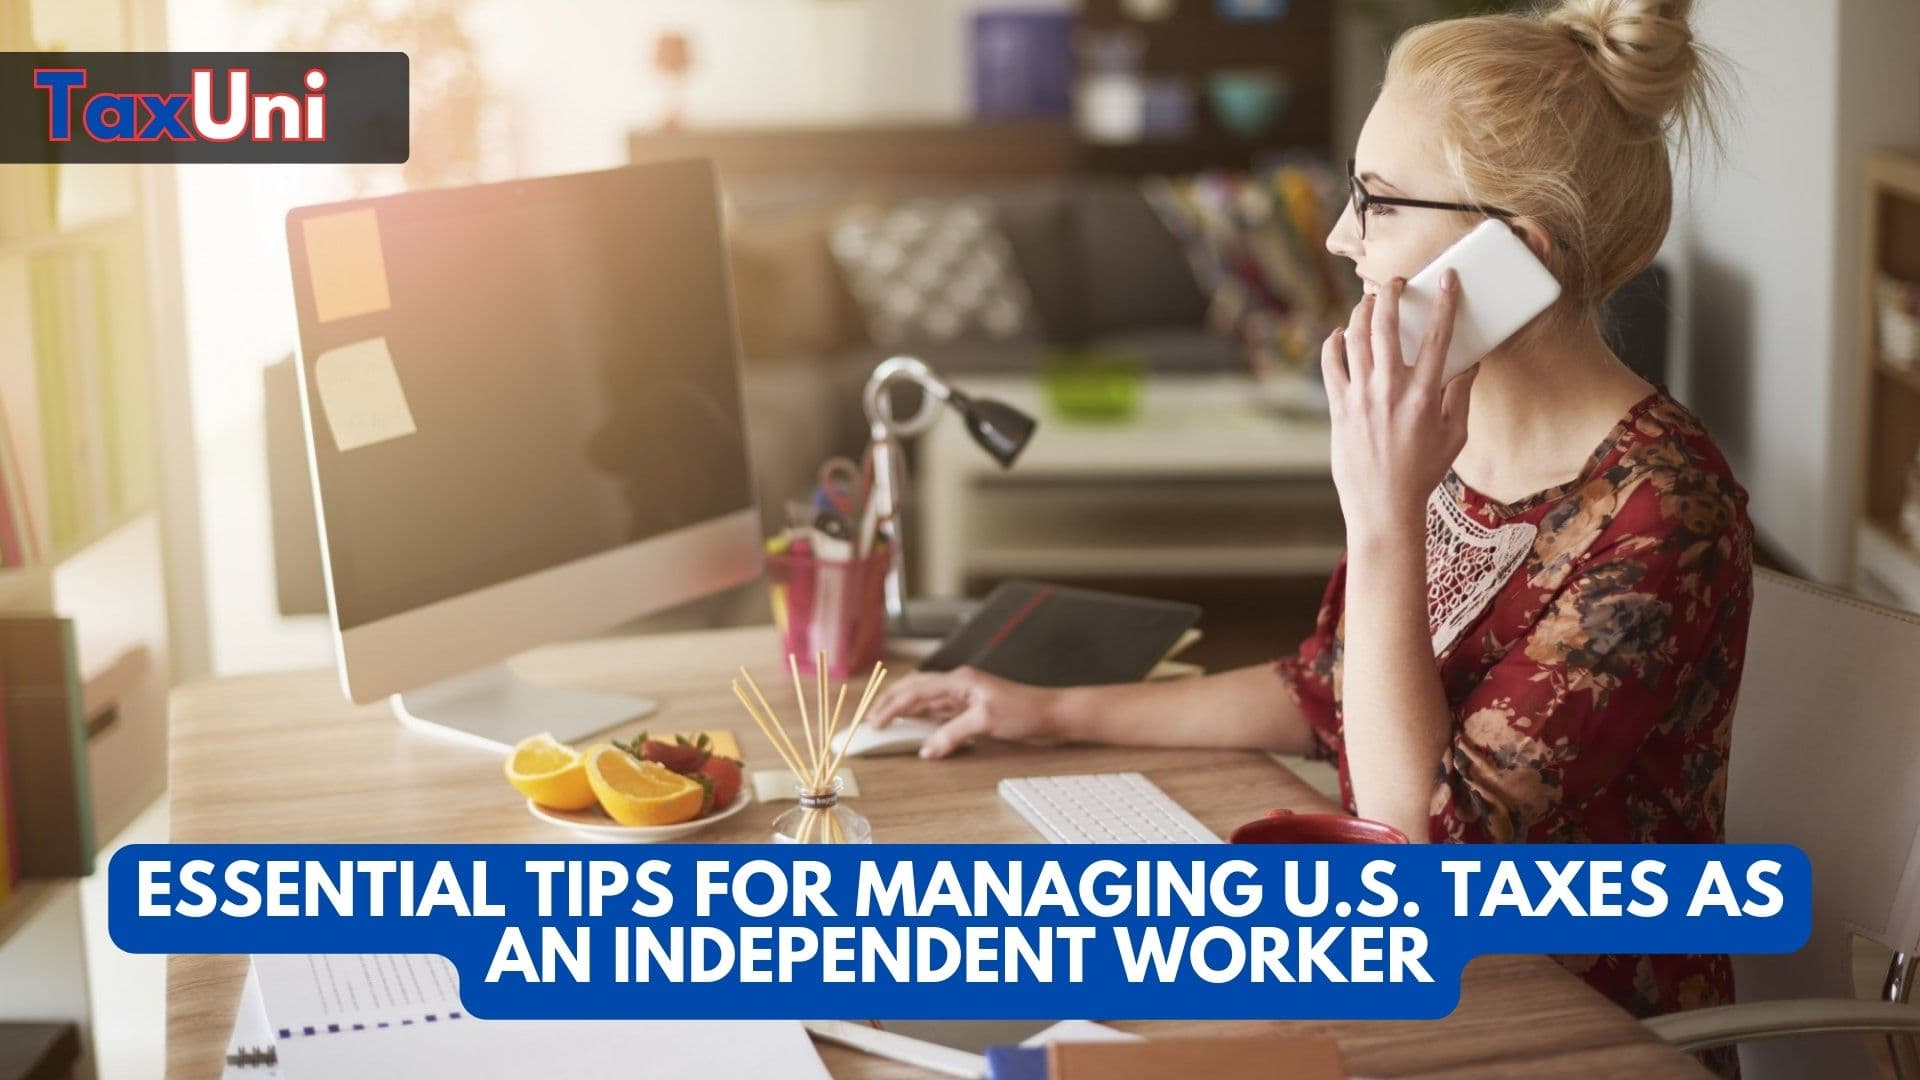 Essential Tips for Managing U.S. Taxes as an Independent Worker